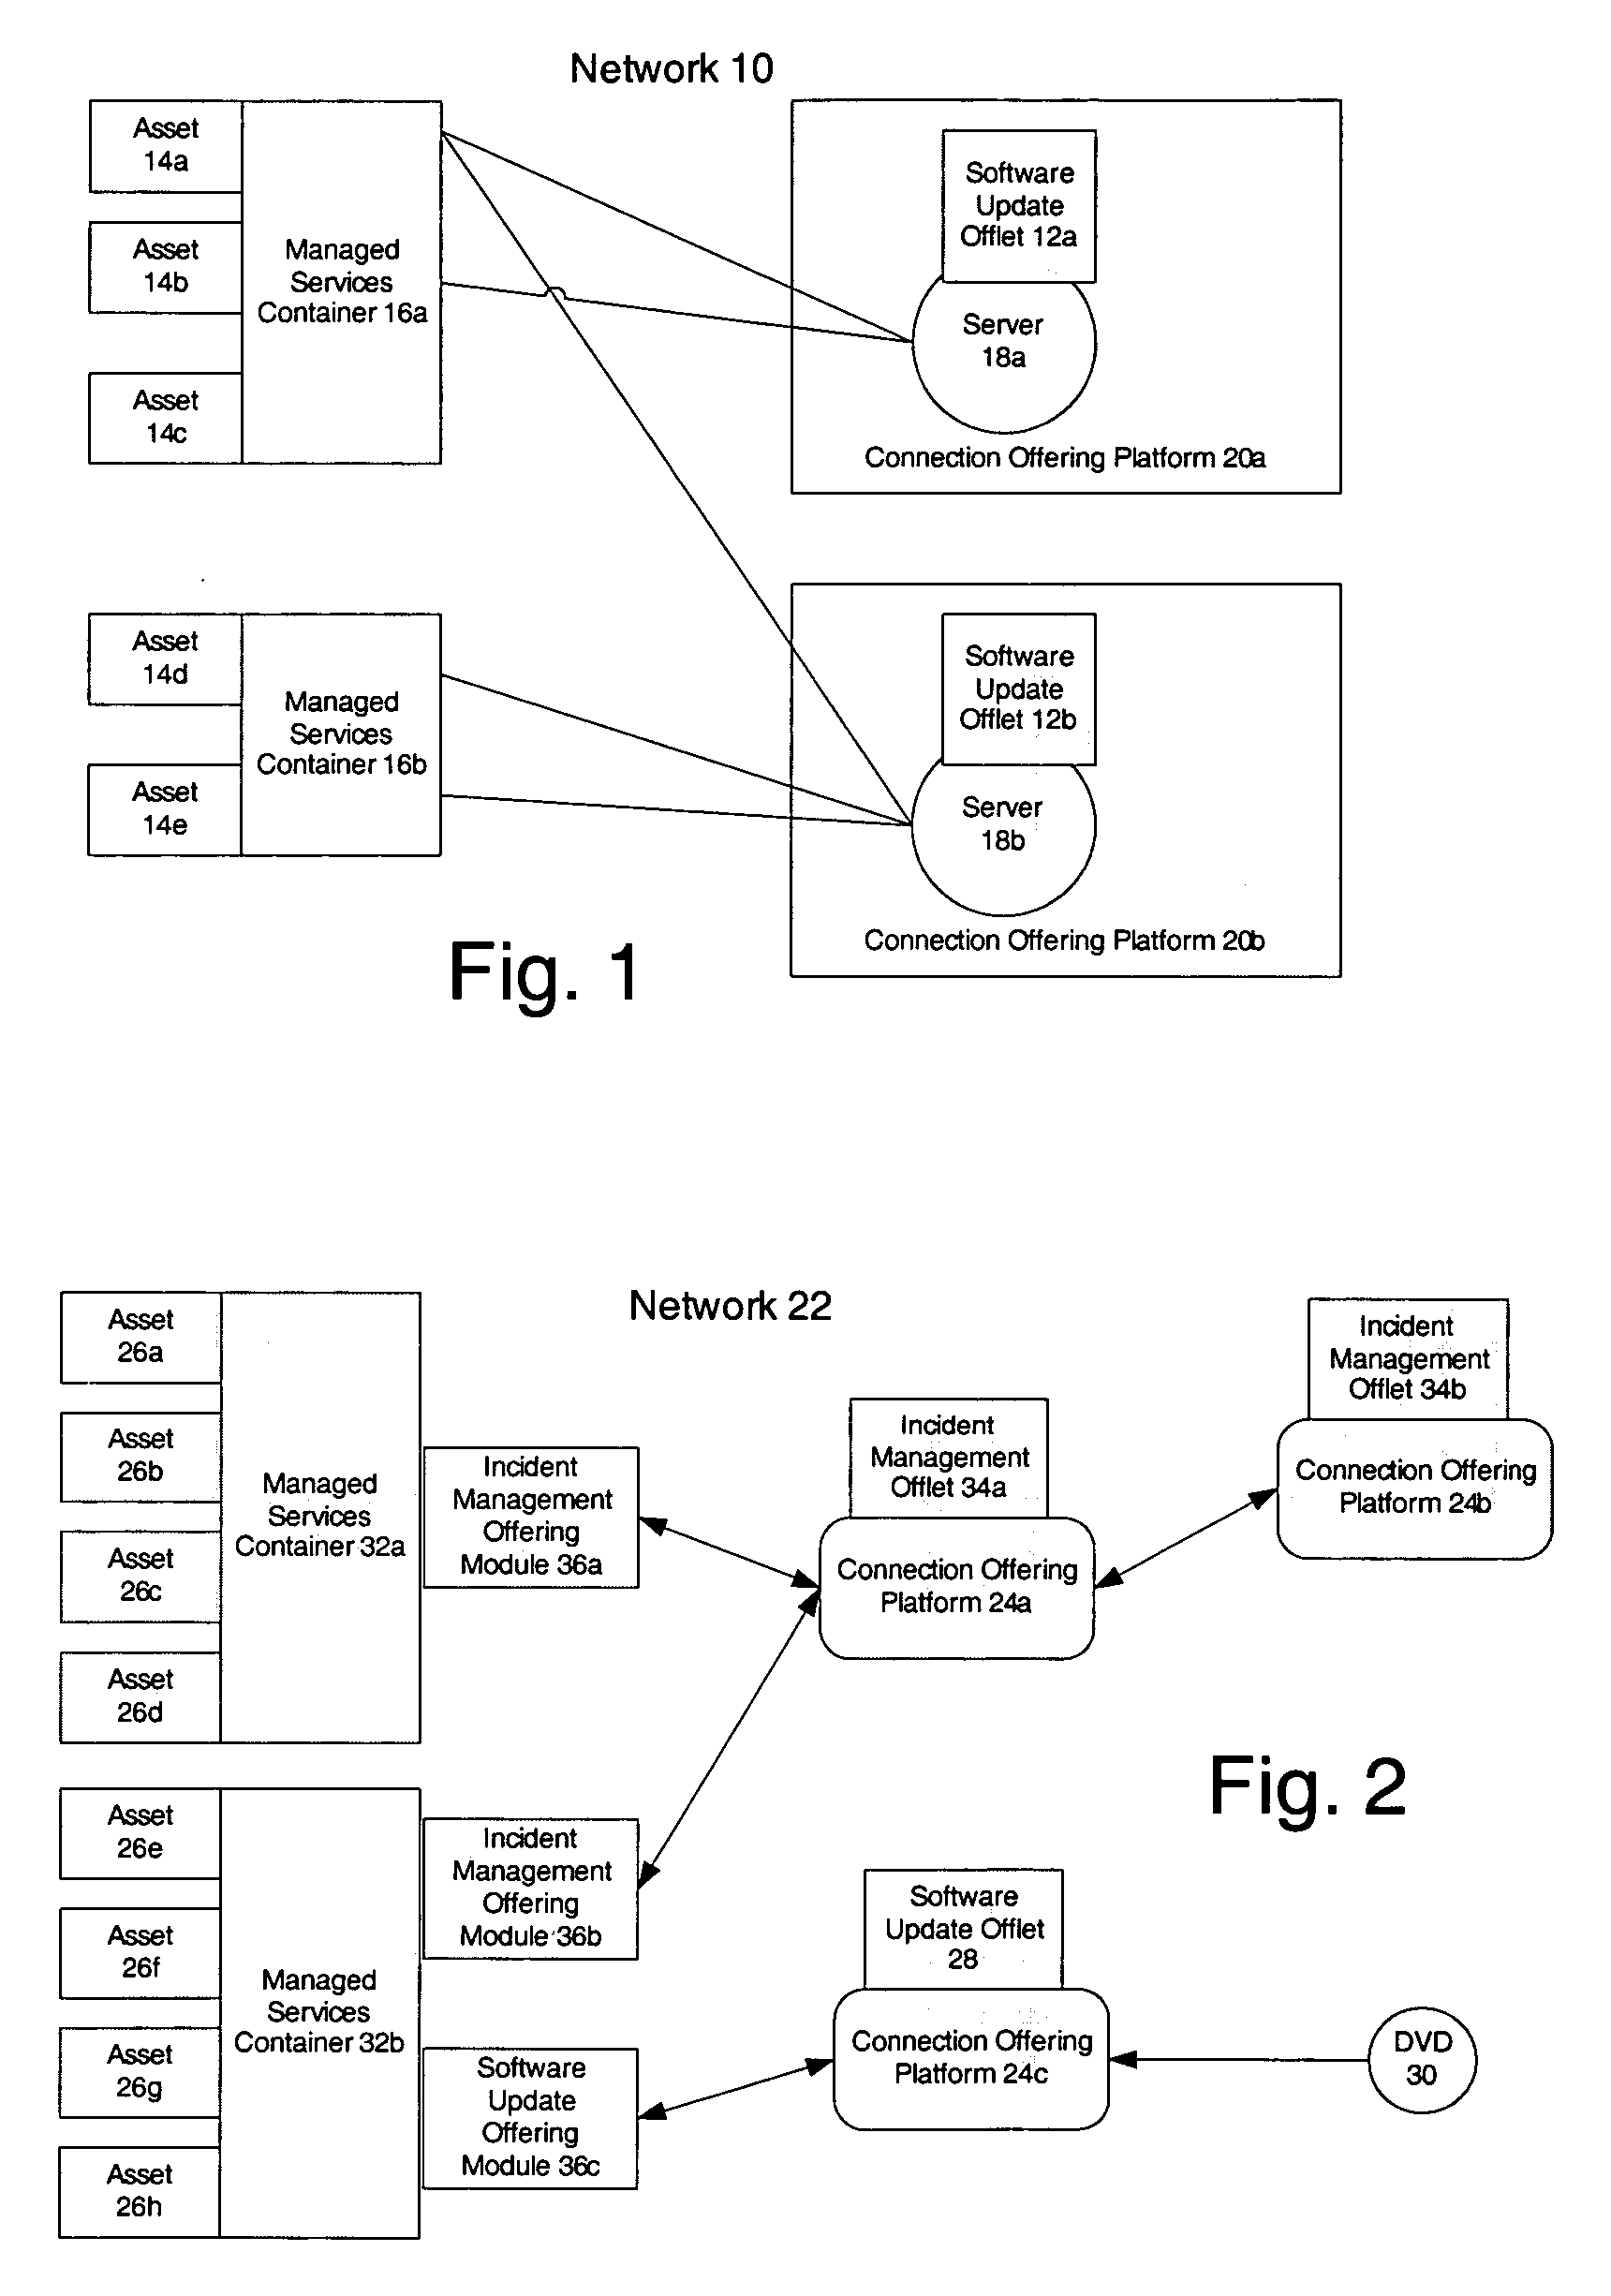 Dynamic sending policies and client-side disaster recovery mechanism for messaging communication